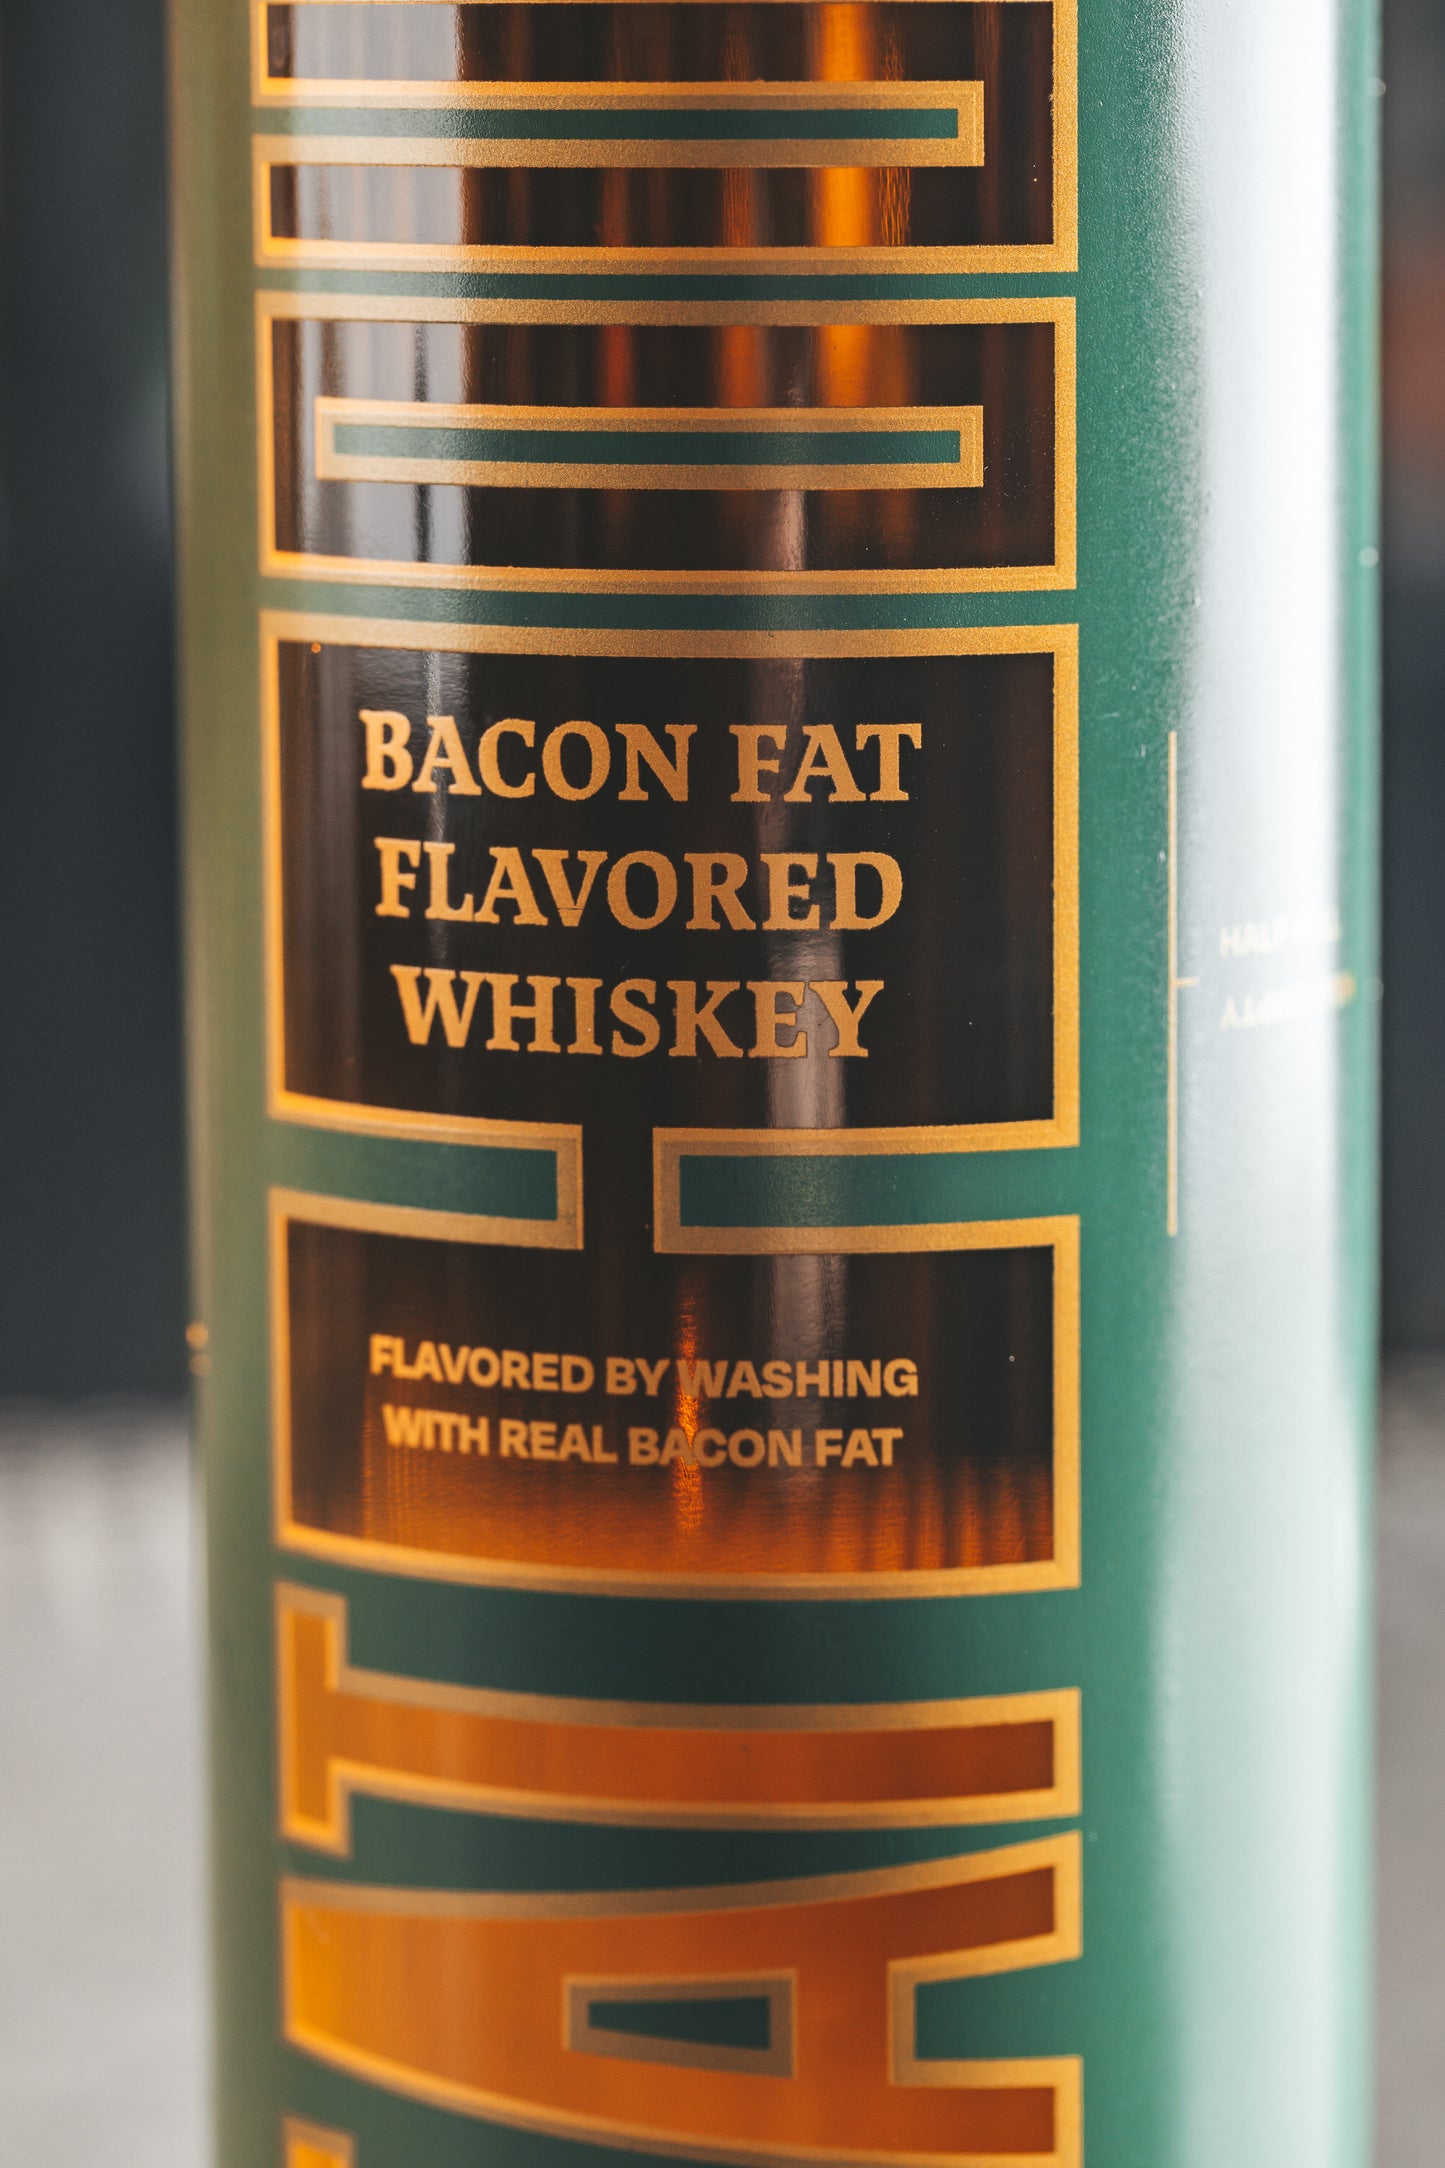 BACON FAT FLAVORED WHISKEY